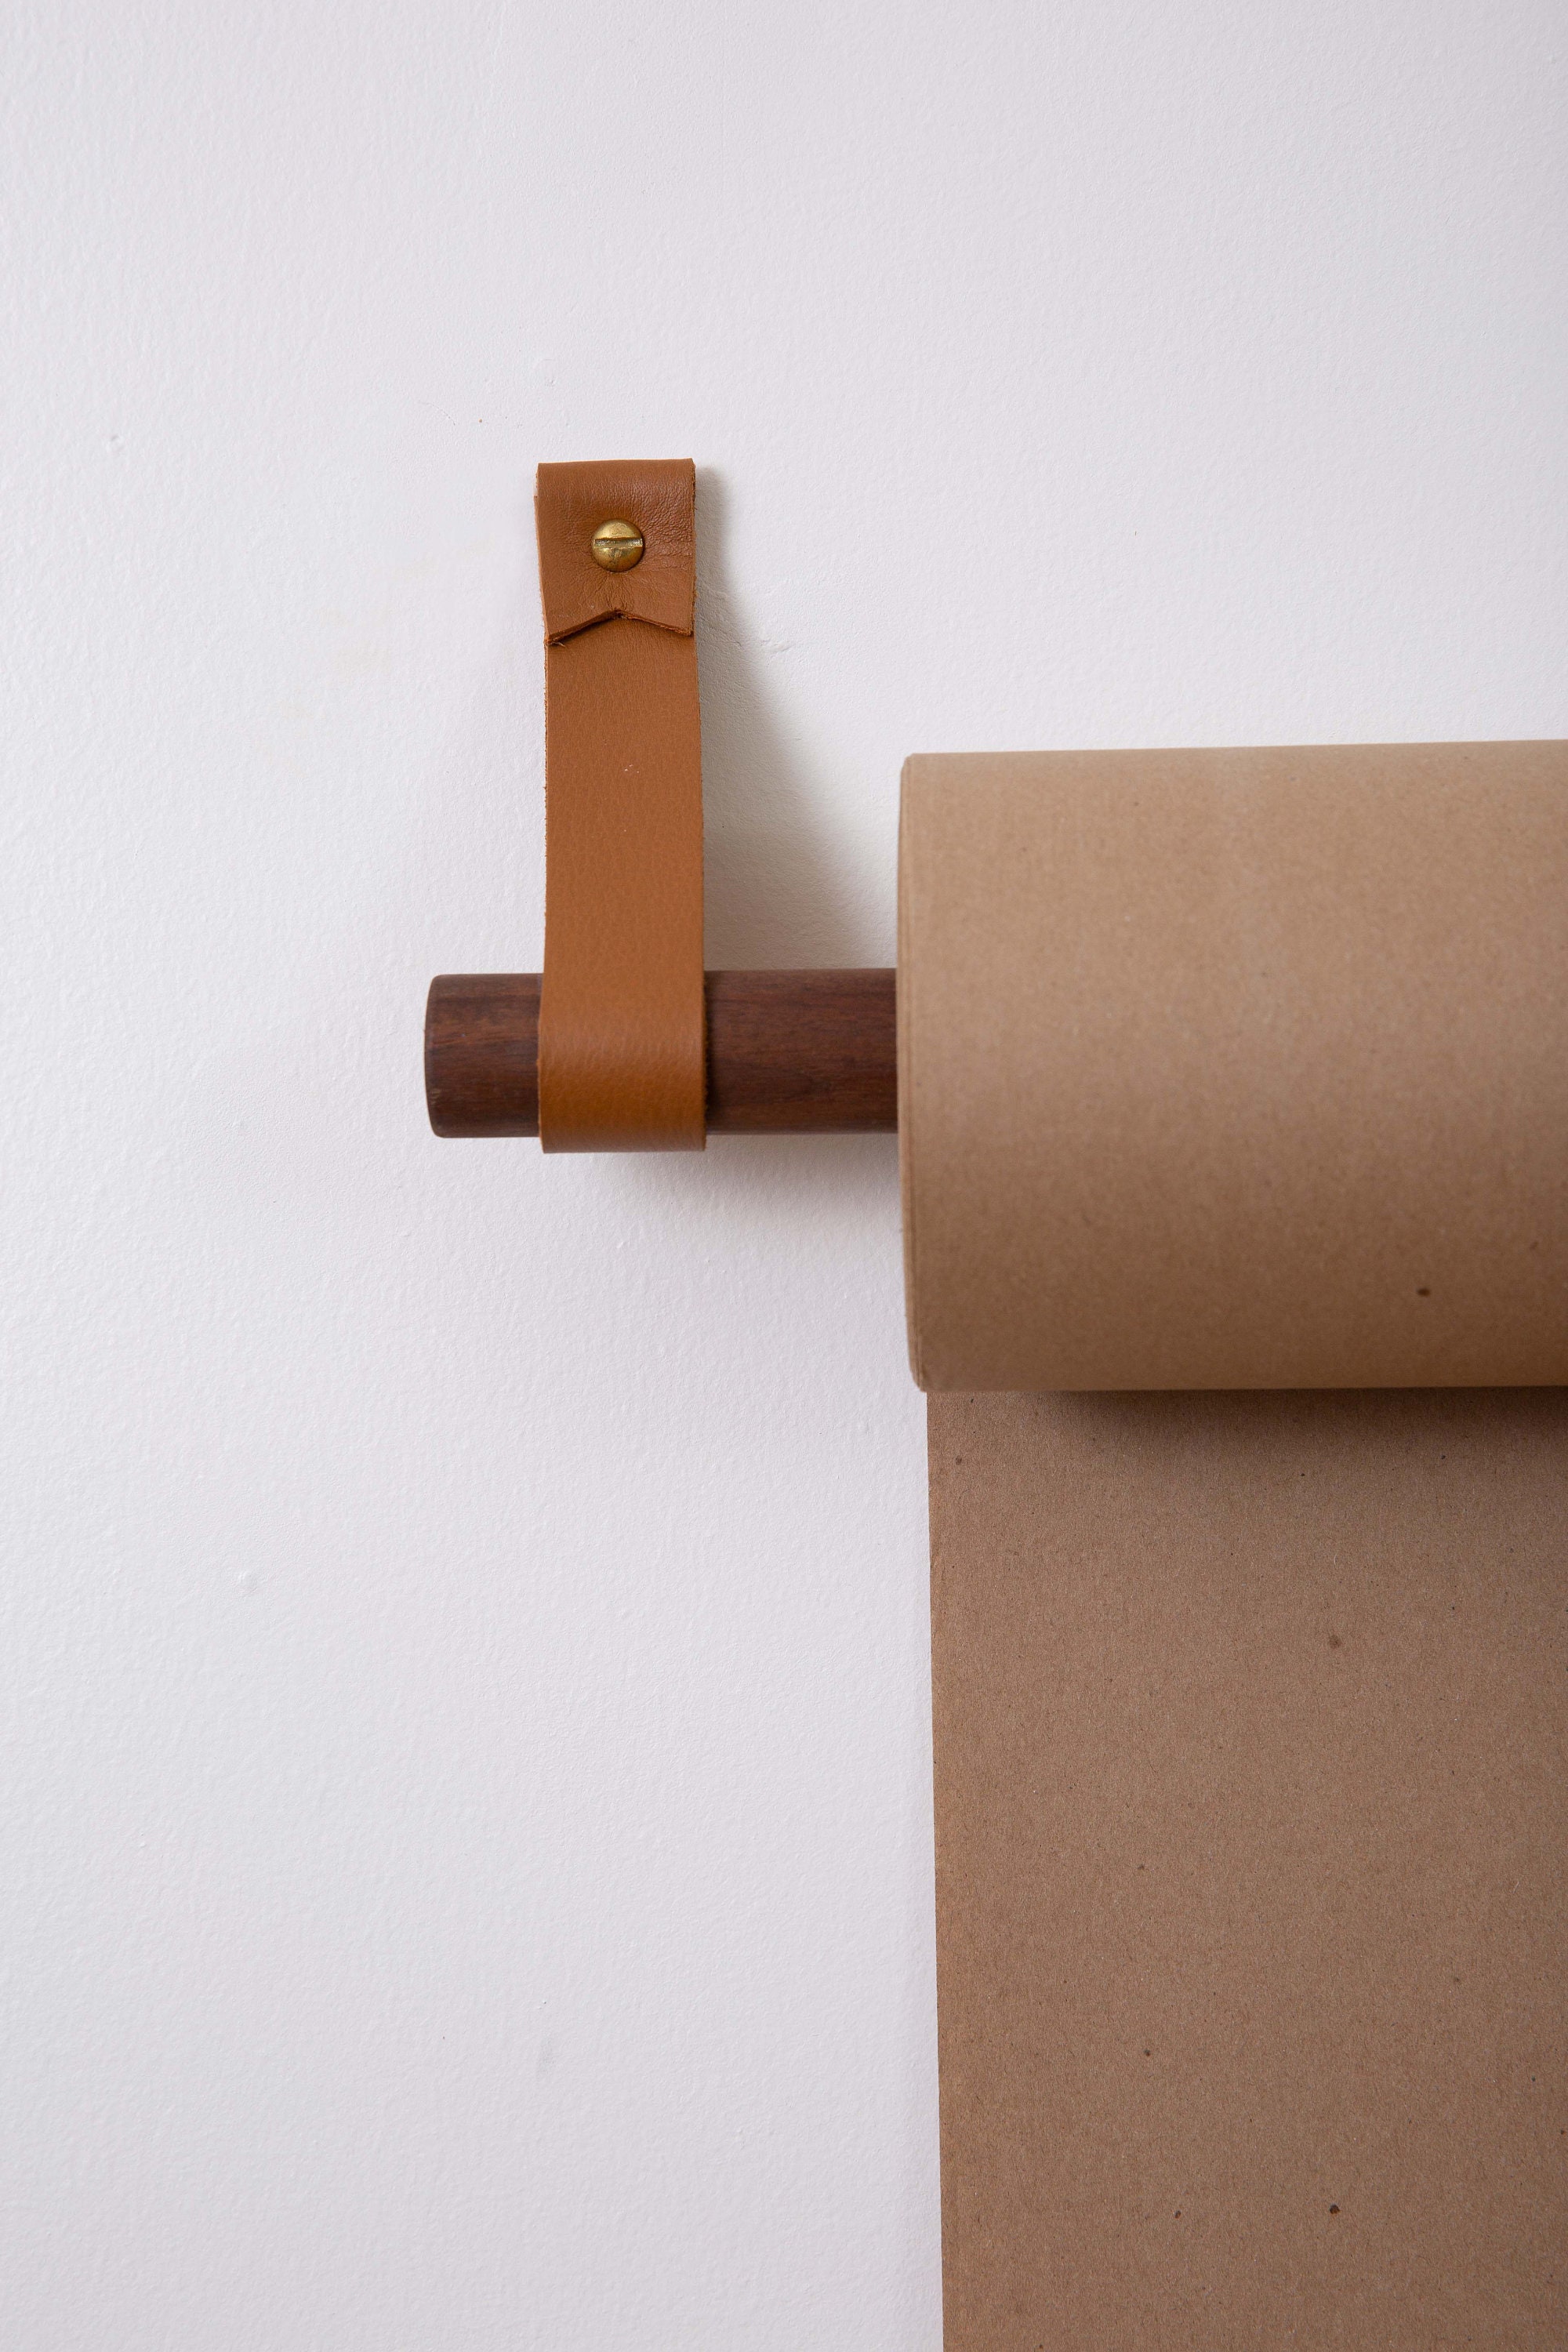 Leather Kraft Paper Holder to Do List Large Parchment Paper Roll Hanger  Wall Mounted Home Organization Shopping List Display Butchers Paper -   Norway